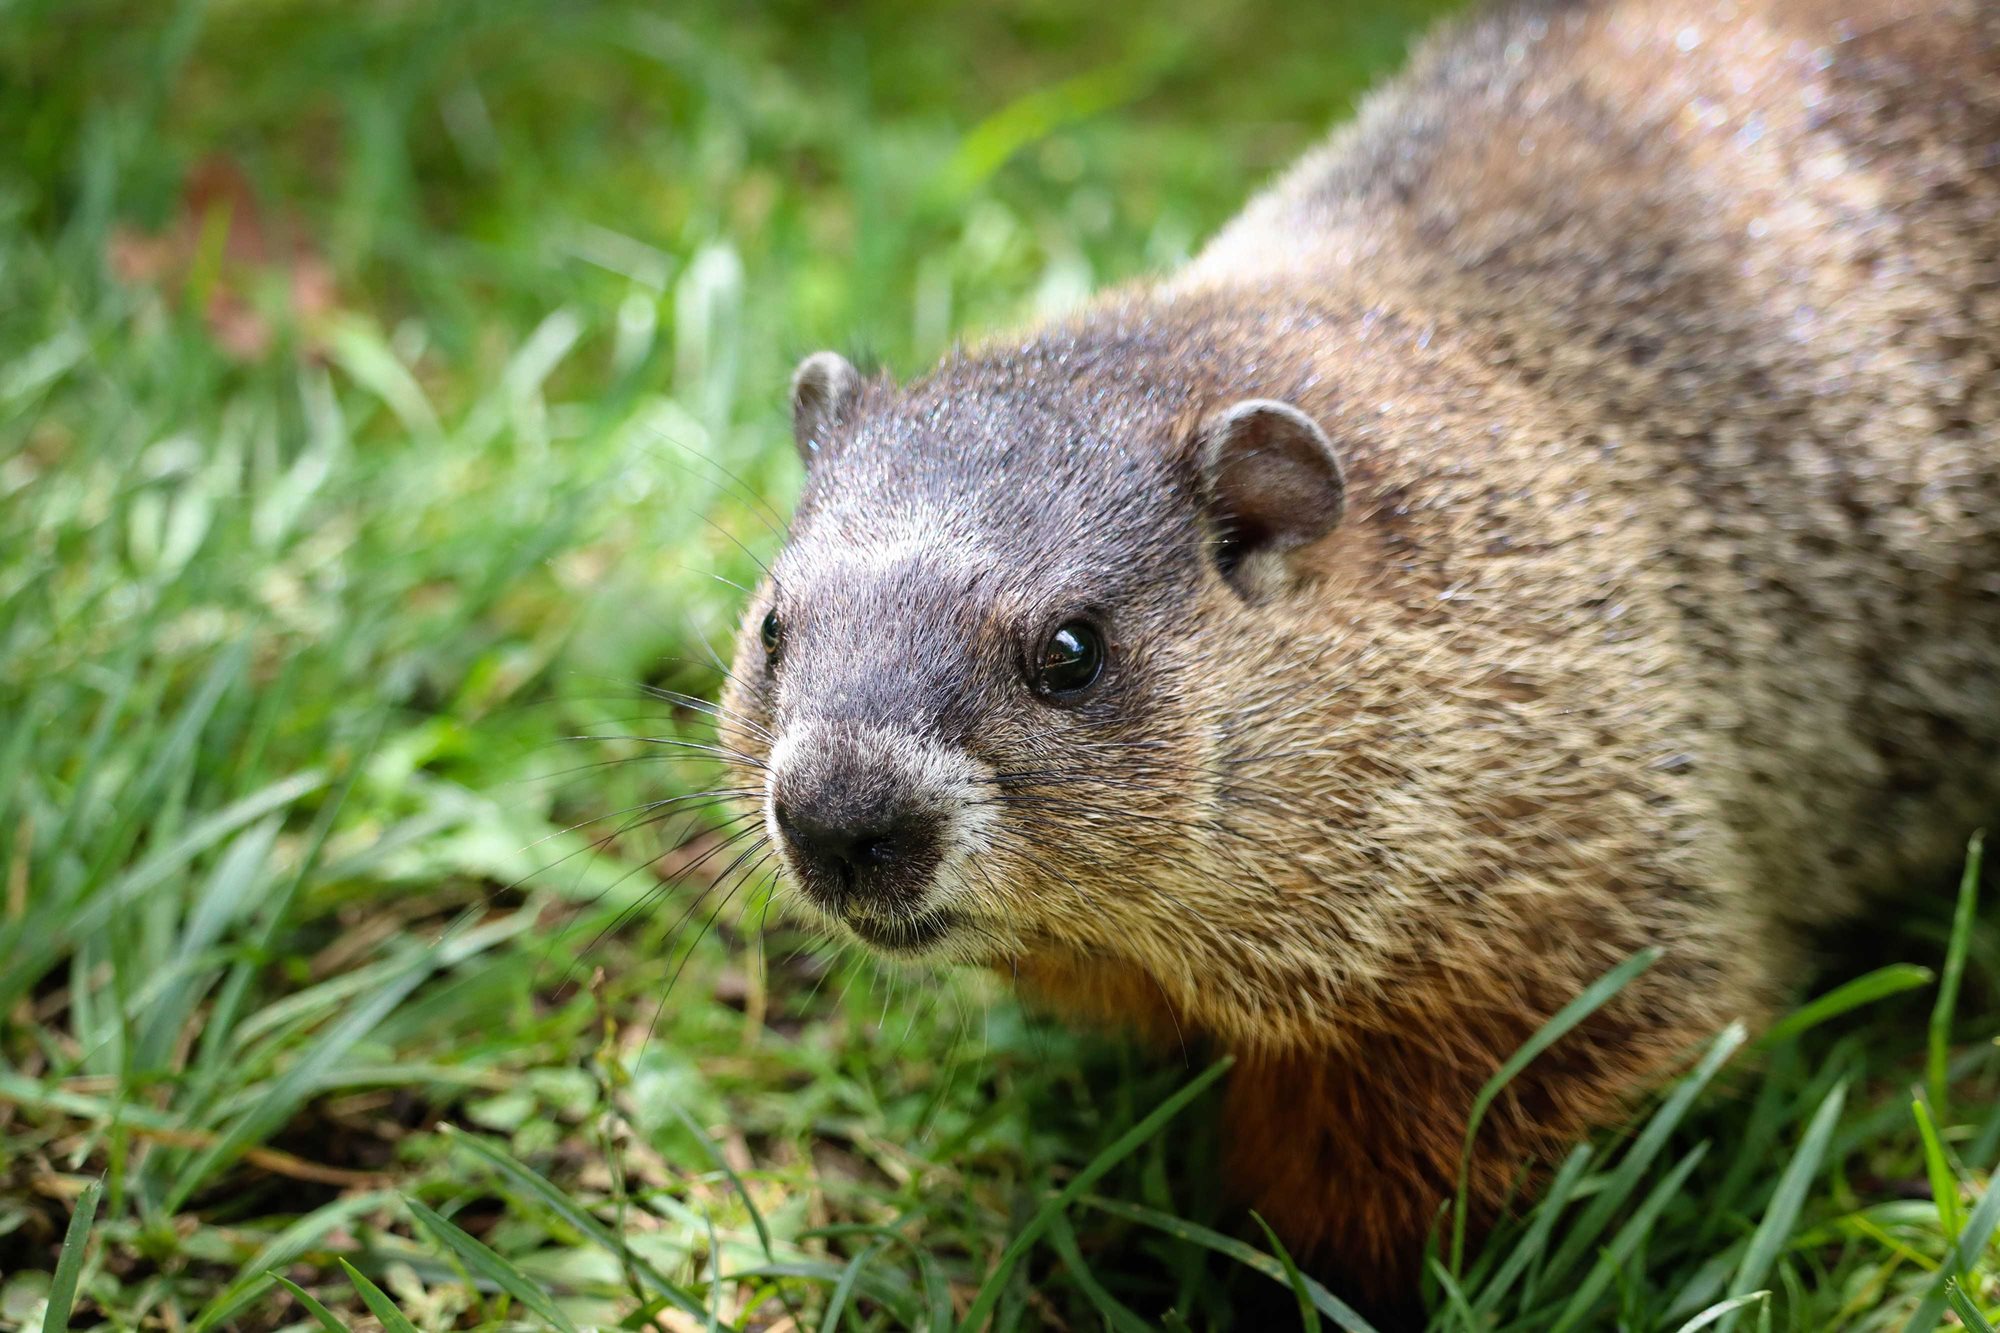 A woodchuck in the grass.